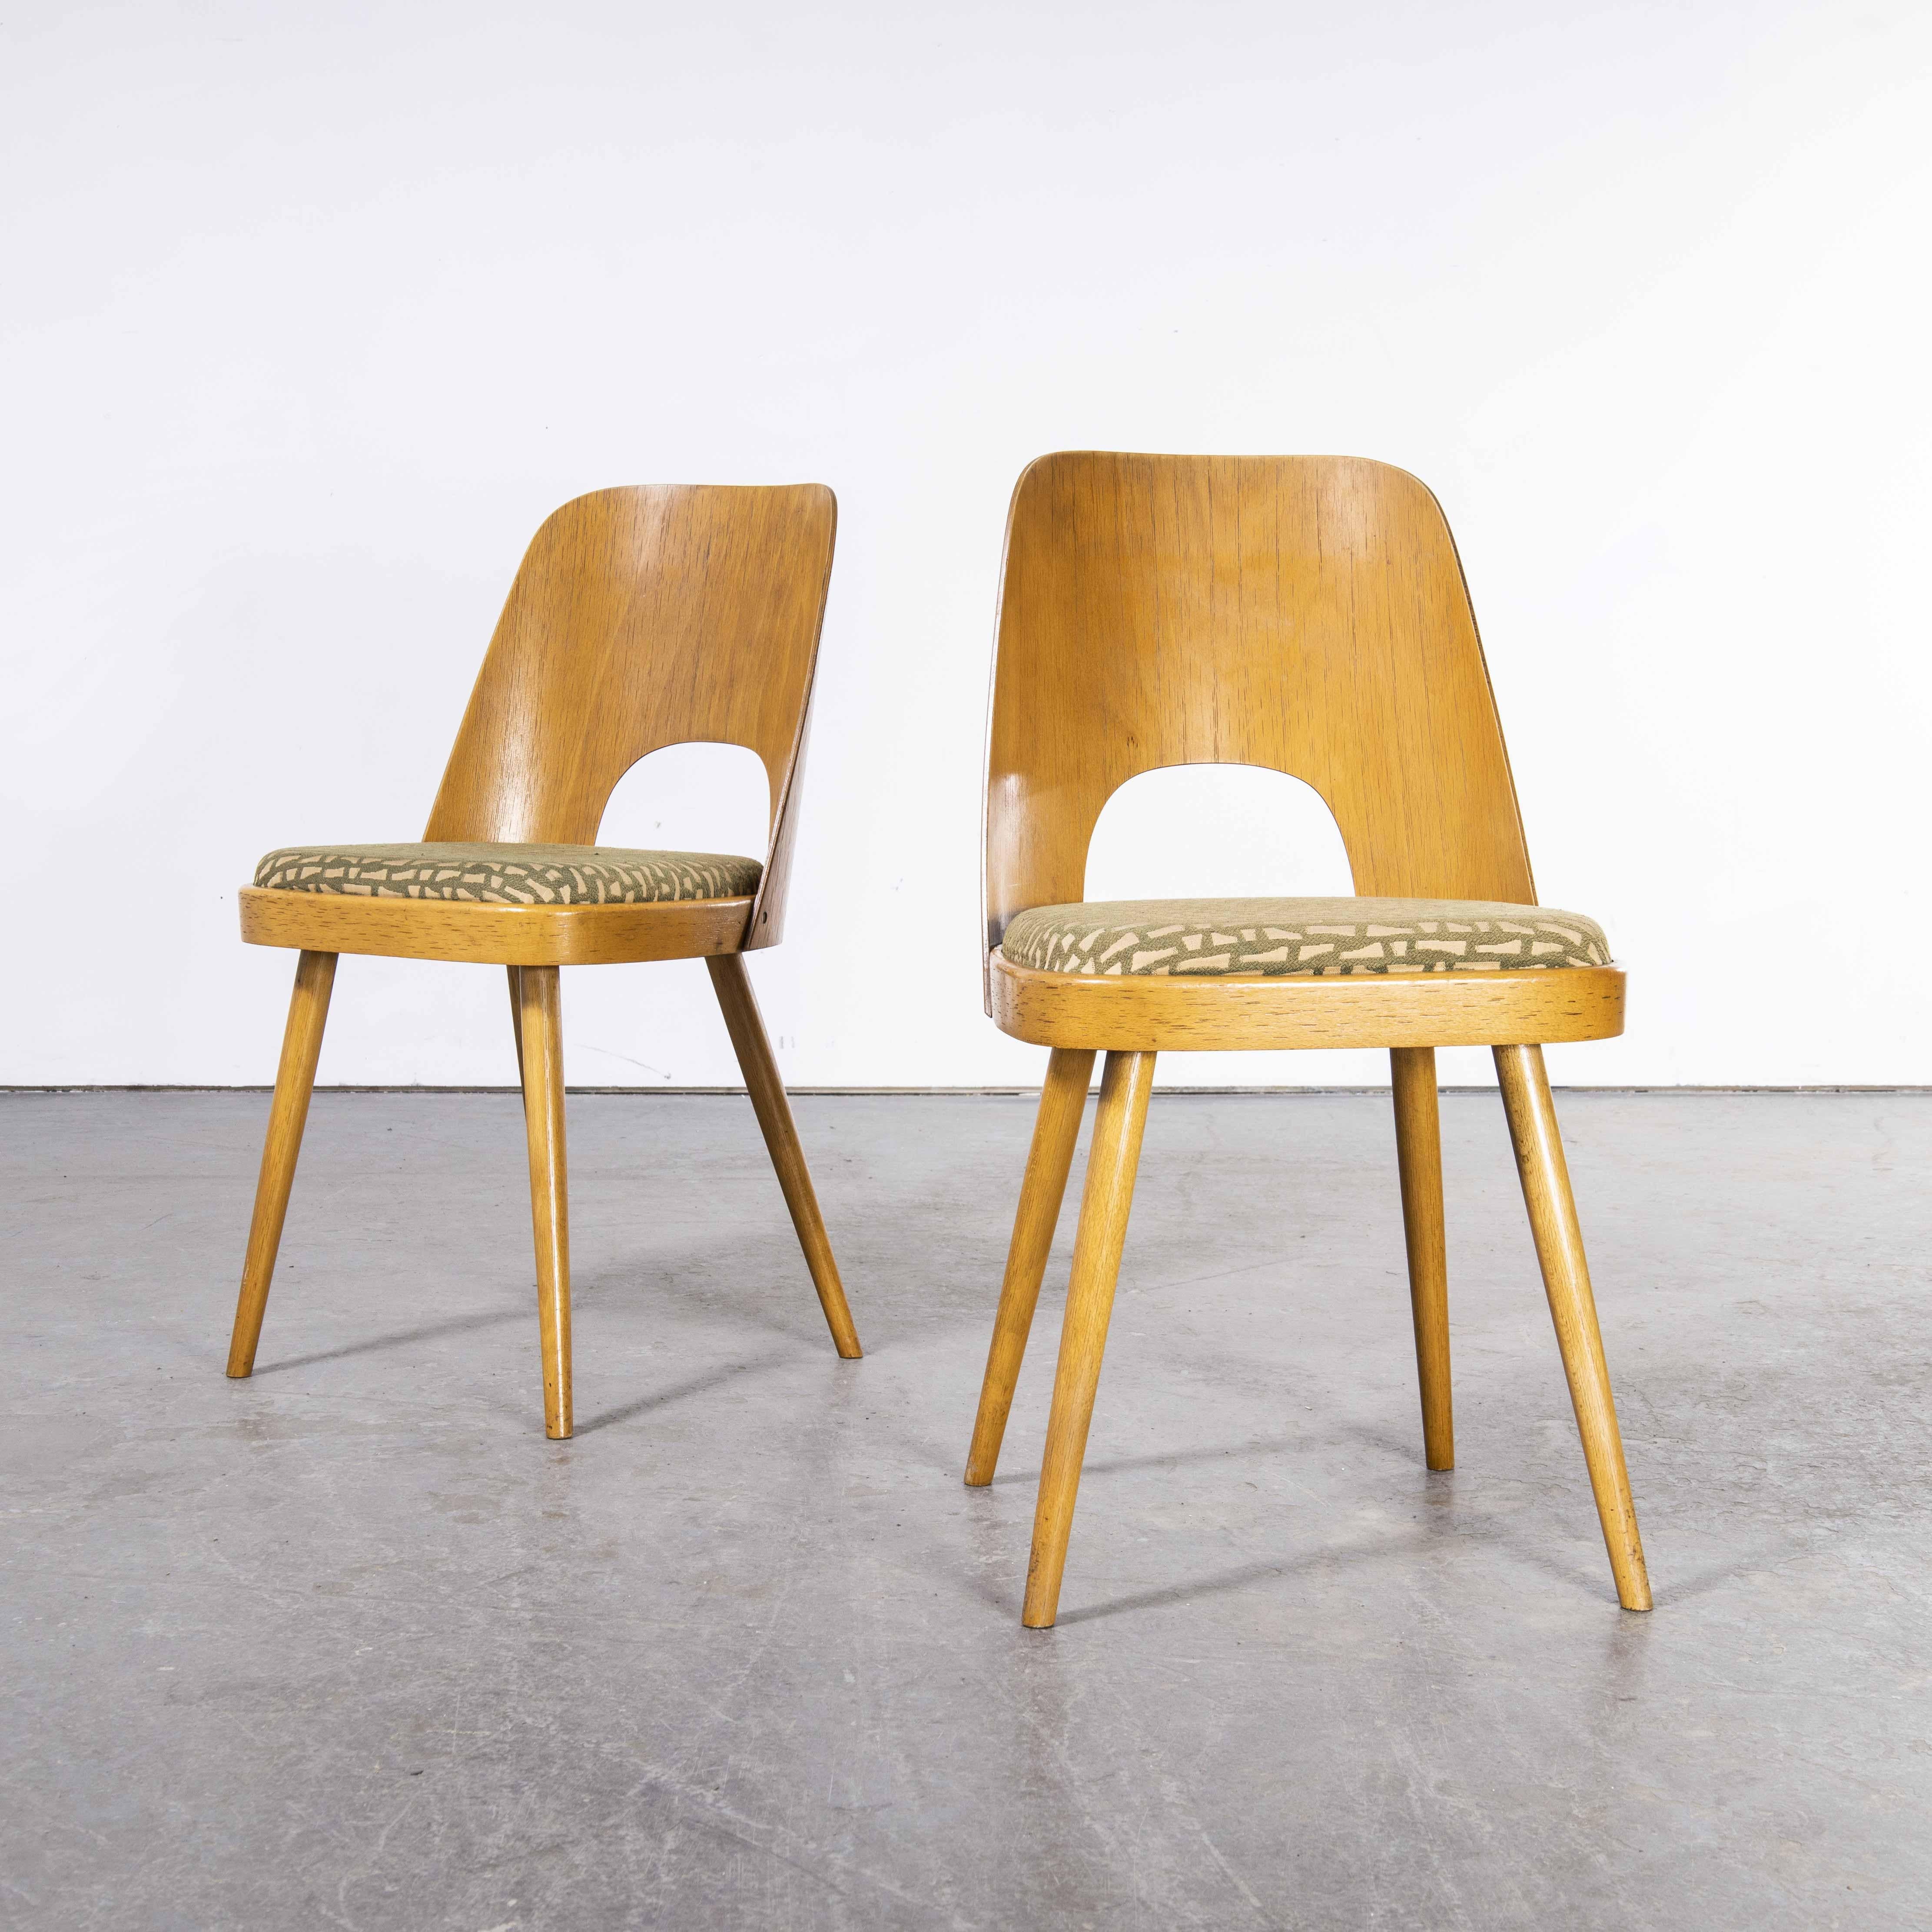 1960’s Pair of upholstered dining chairs – Oswald Haerdtl
1960’s Pair of upholstered dining chairs – Oswald Haerdtl. These chairs were produced by the famous Czech firm Ton, still trading today and producing beautiful furniture, they are an